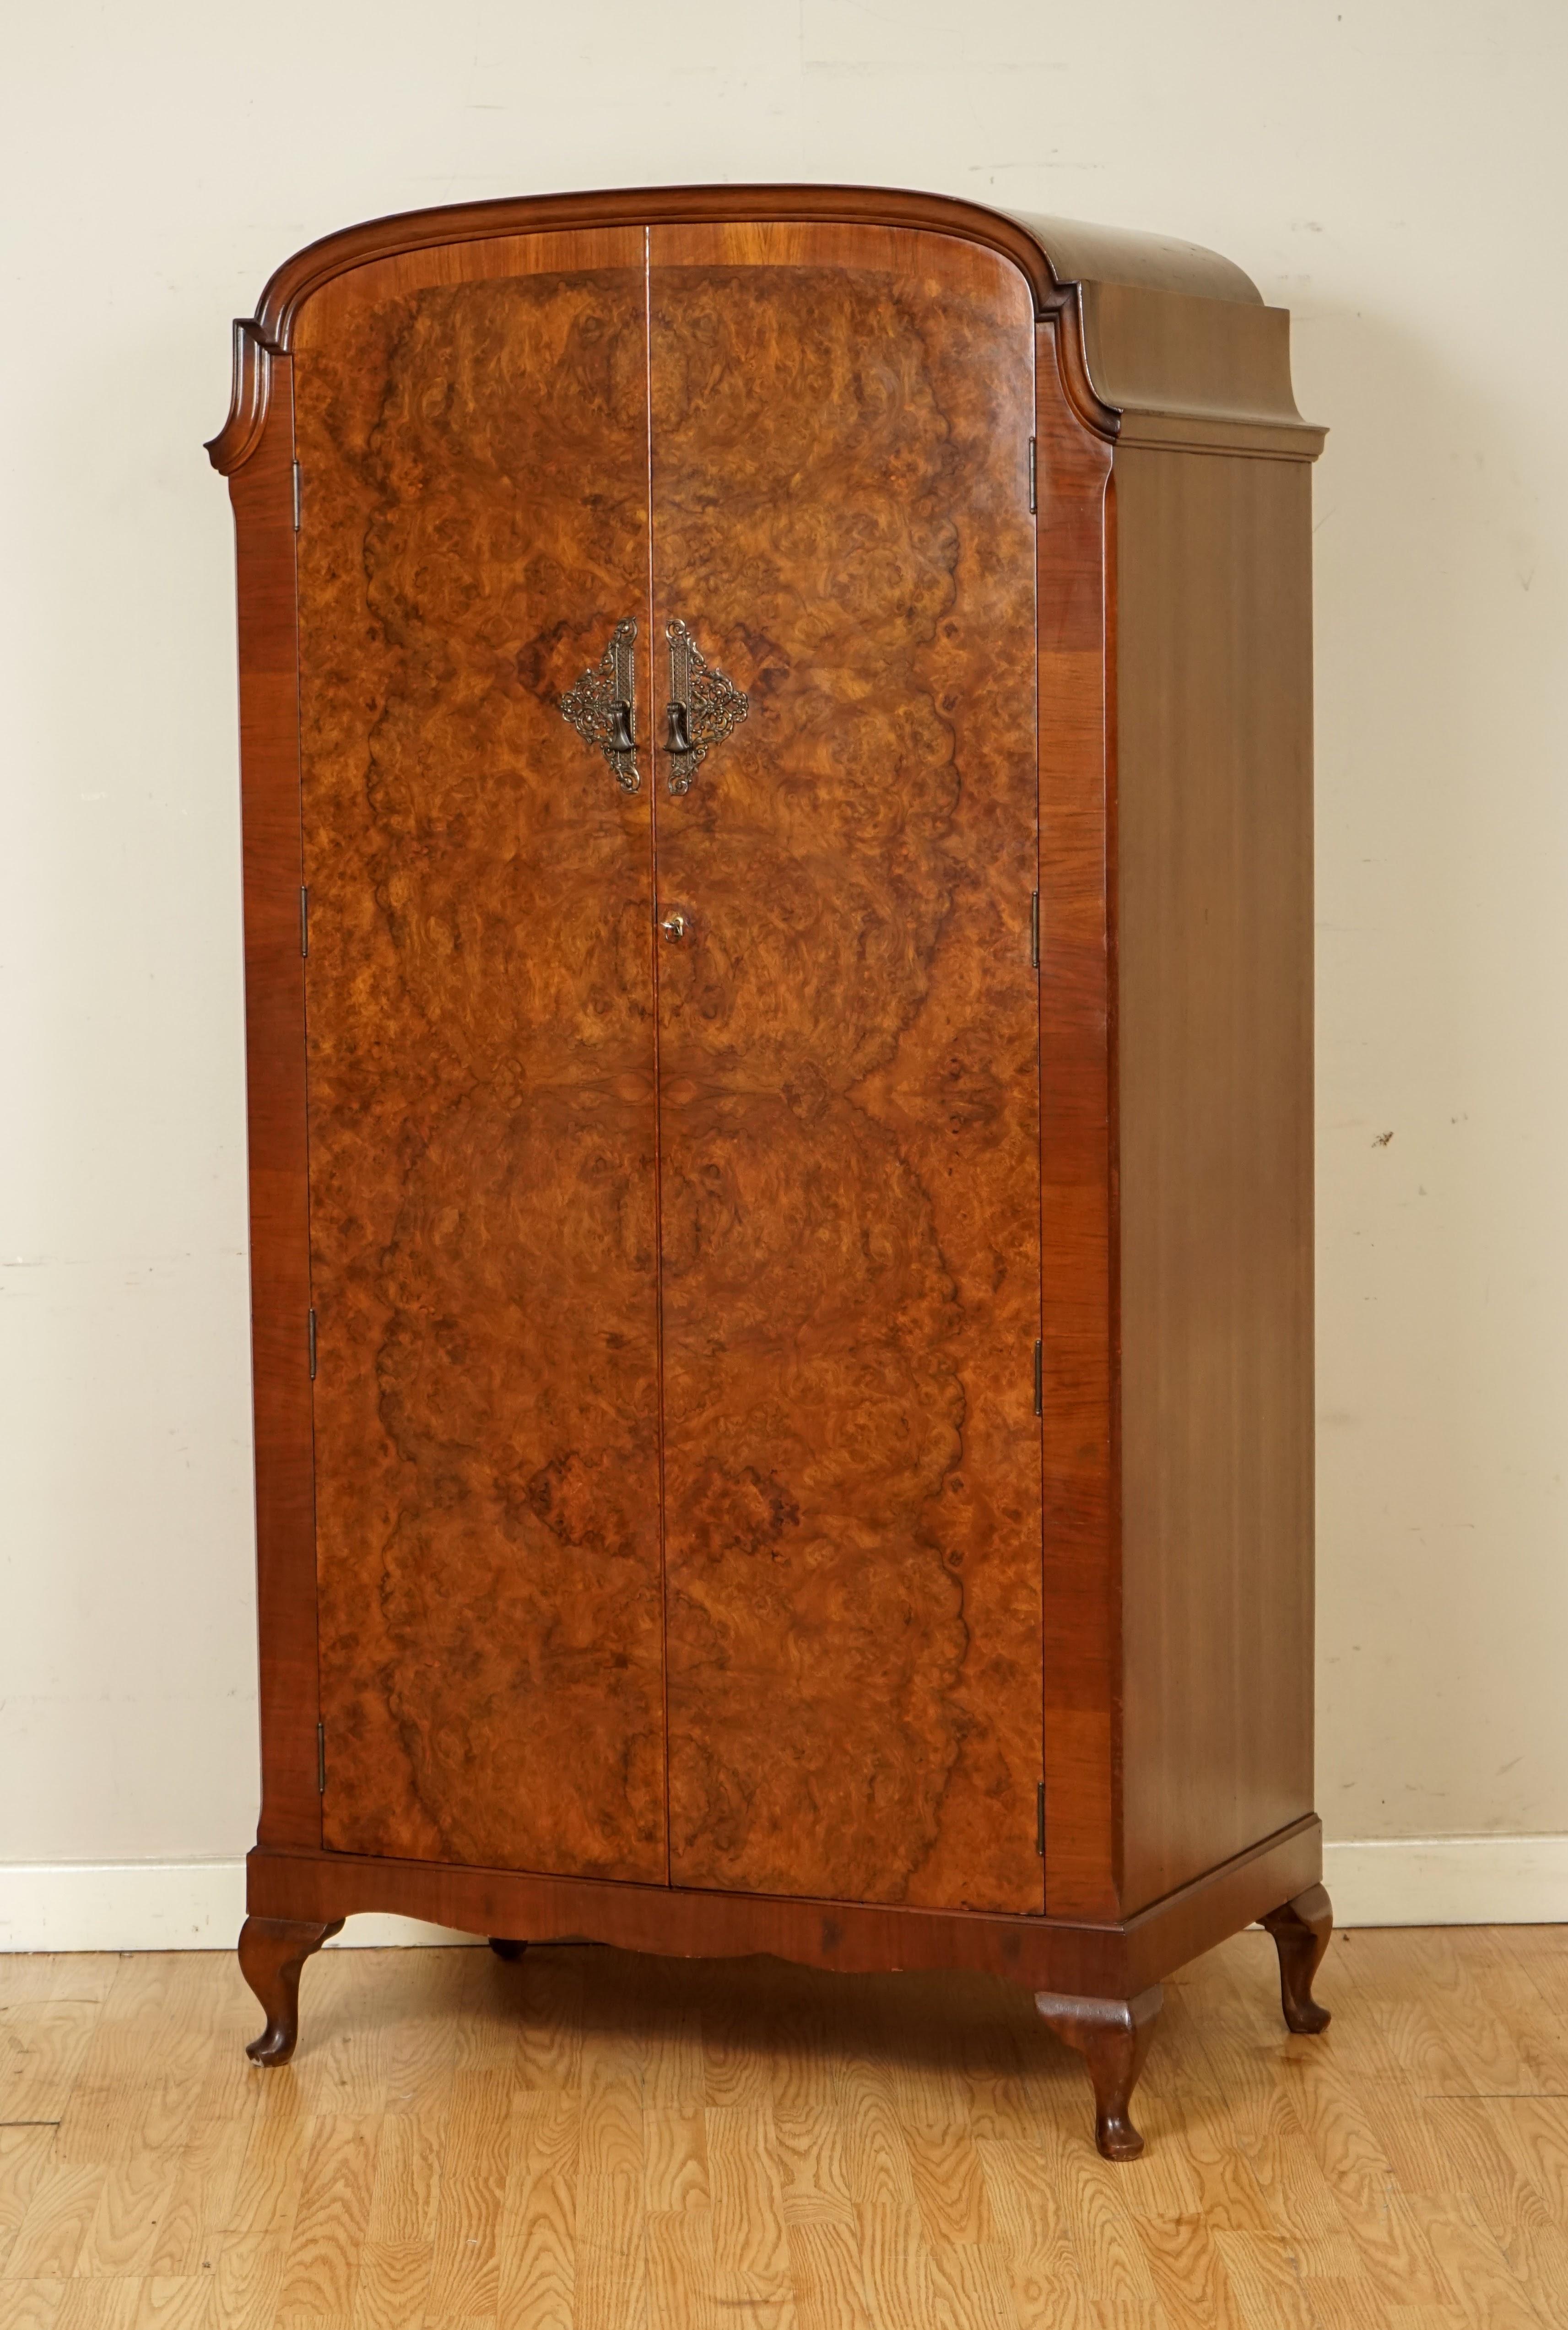 We are so excited to present to you this Art Deco burr walnut double wardrobe.

A very lovely solid and well made wardrobe, there is a damage on side of the wardrobe which has three lines across, apart from that, the rest of the wardrobe is in a